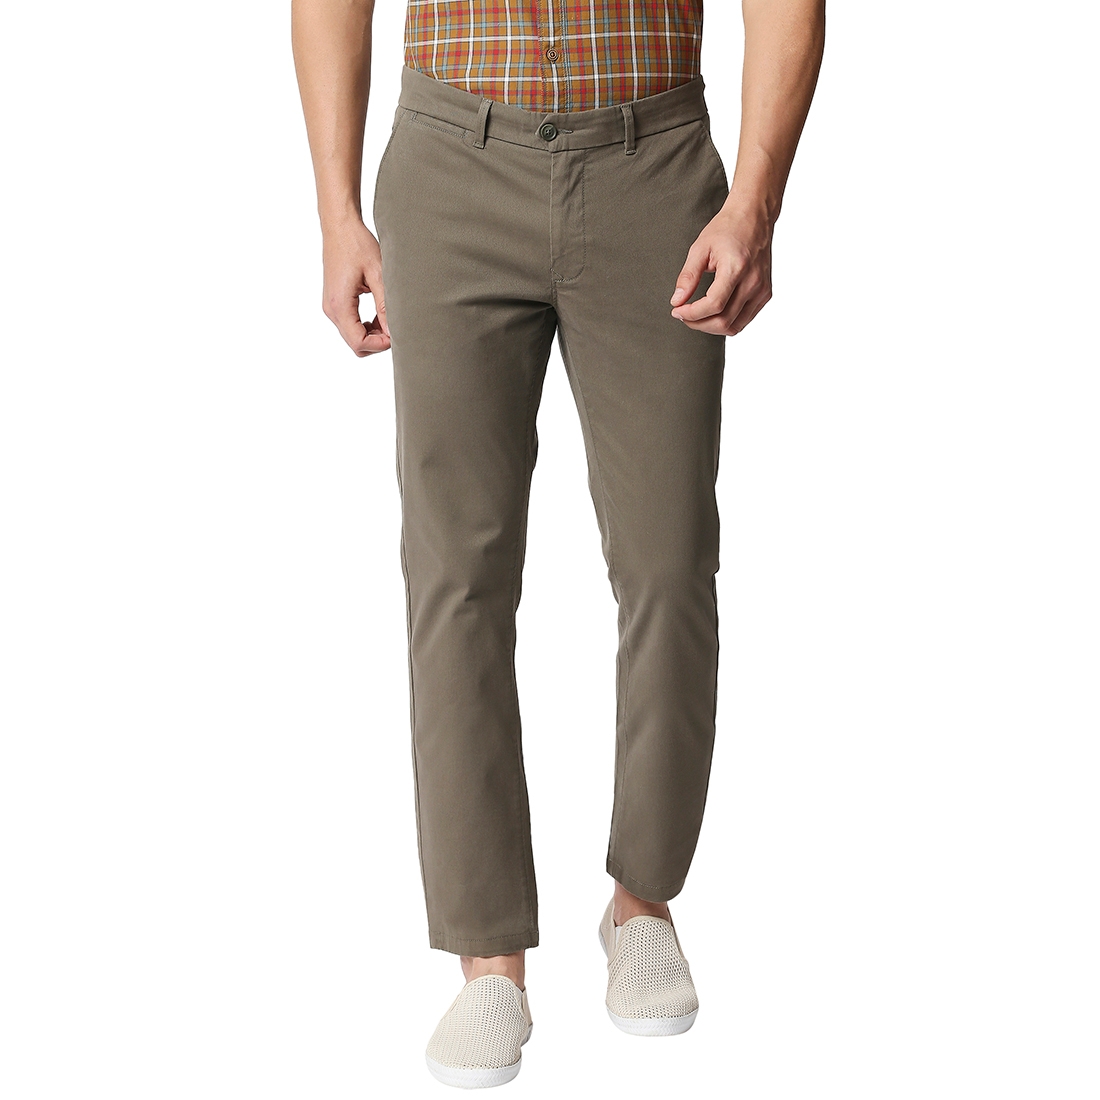 BASICS CASUAL PLAIN OLIVE COTTON STRETCH TAPERED TROUSERS 